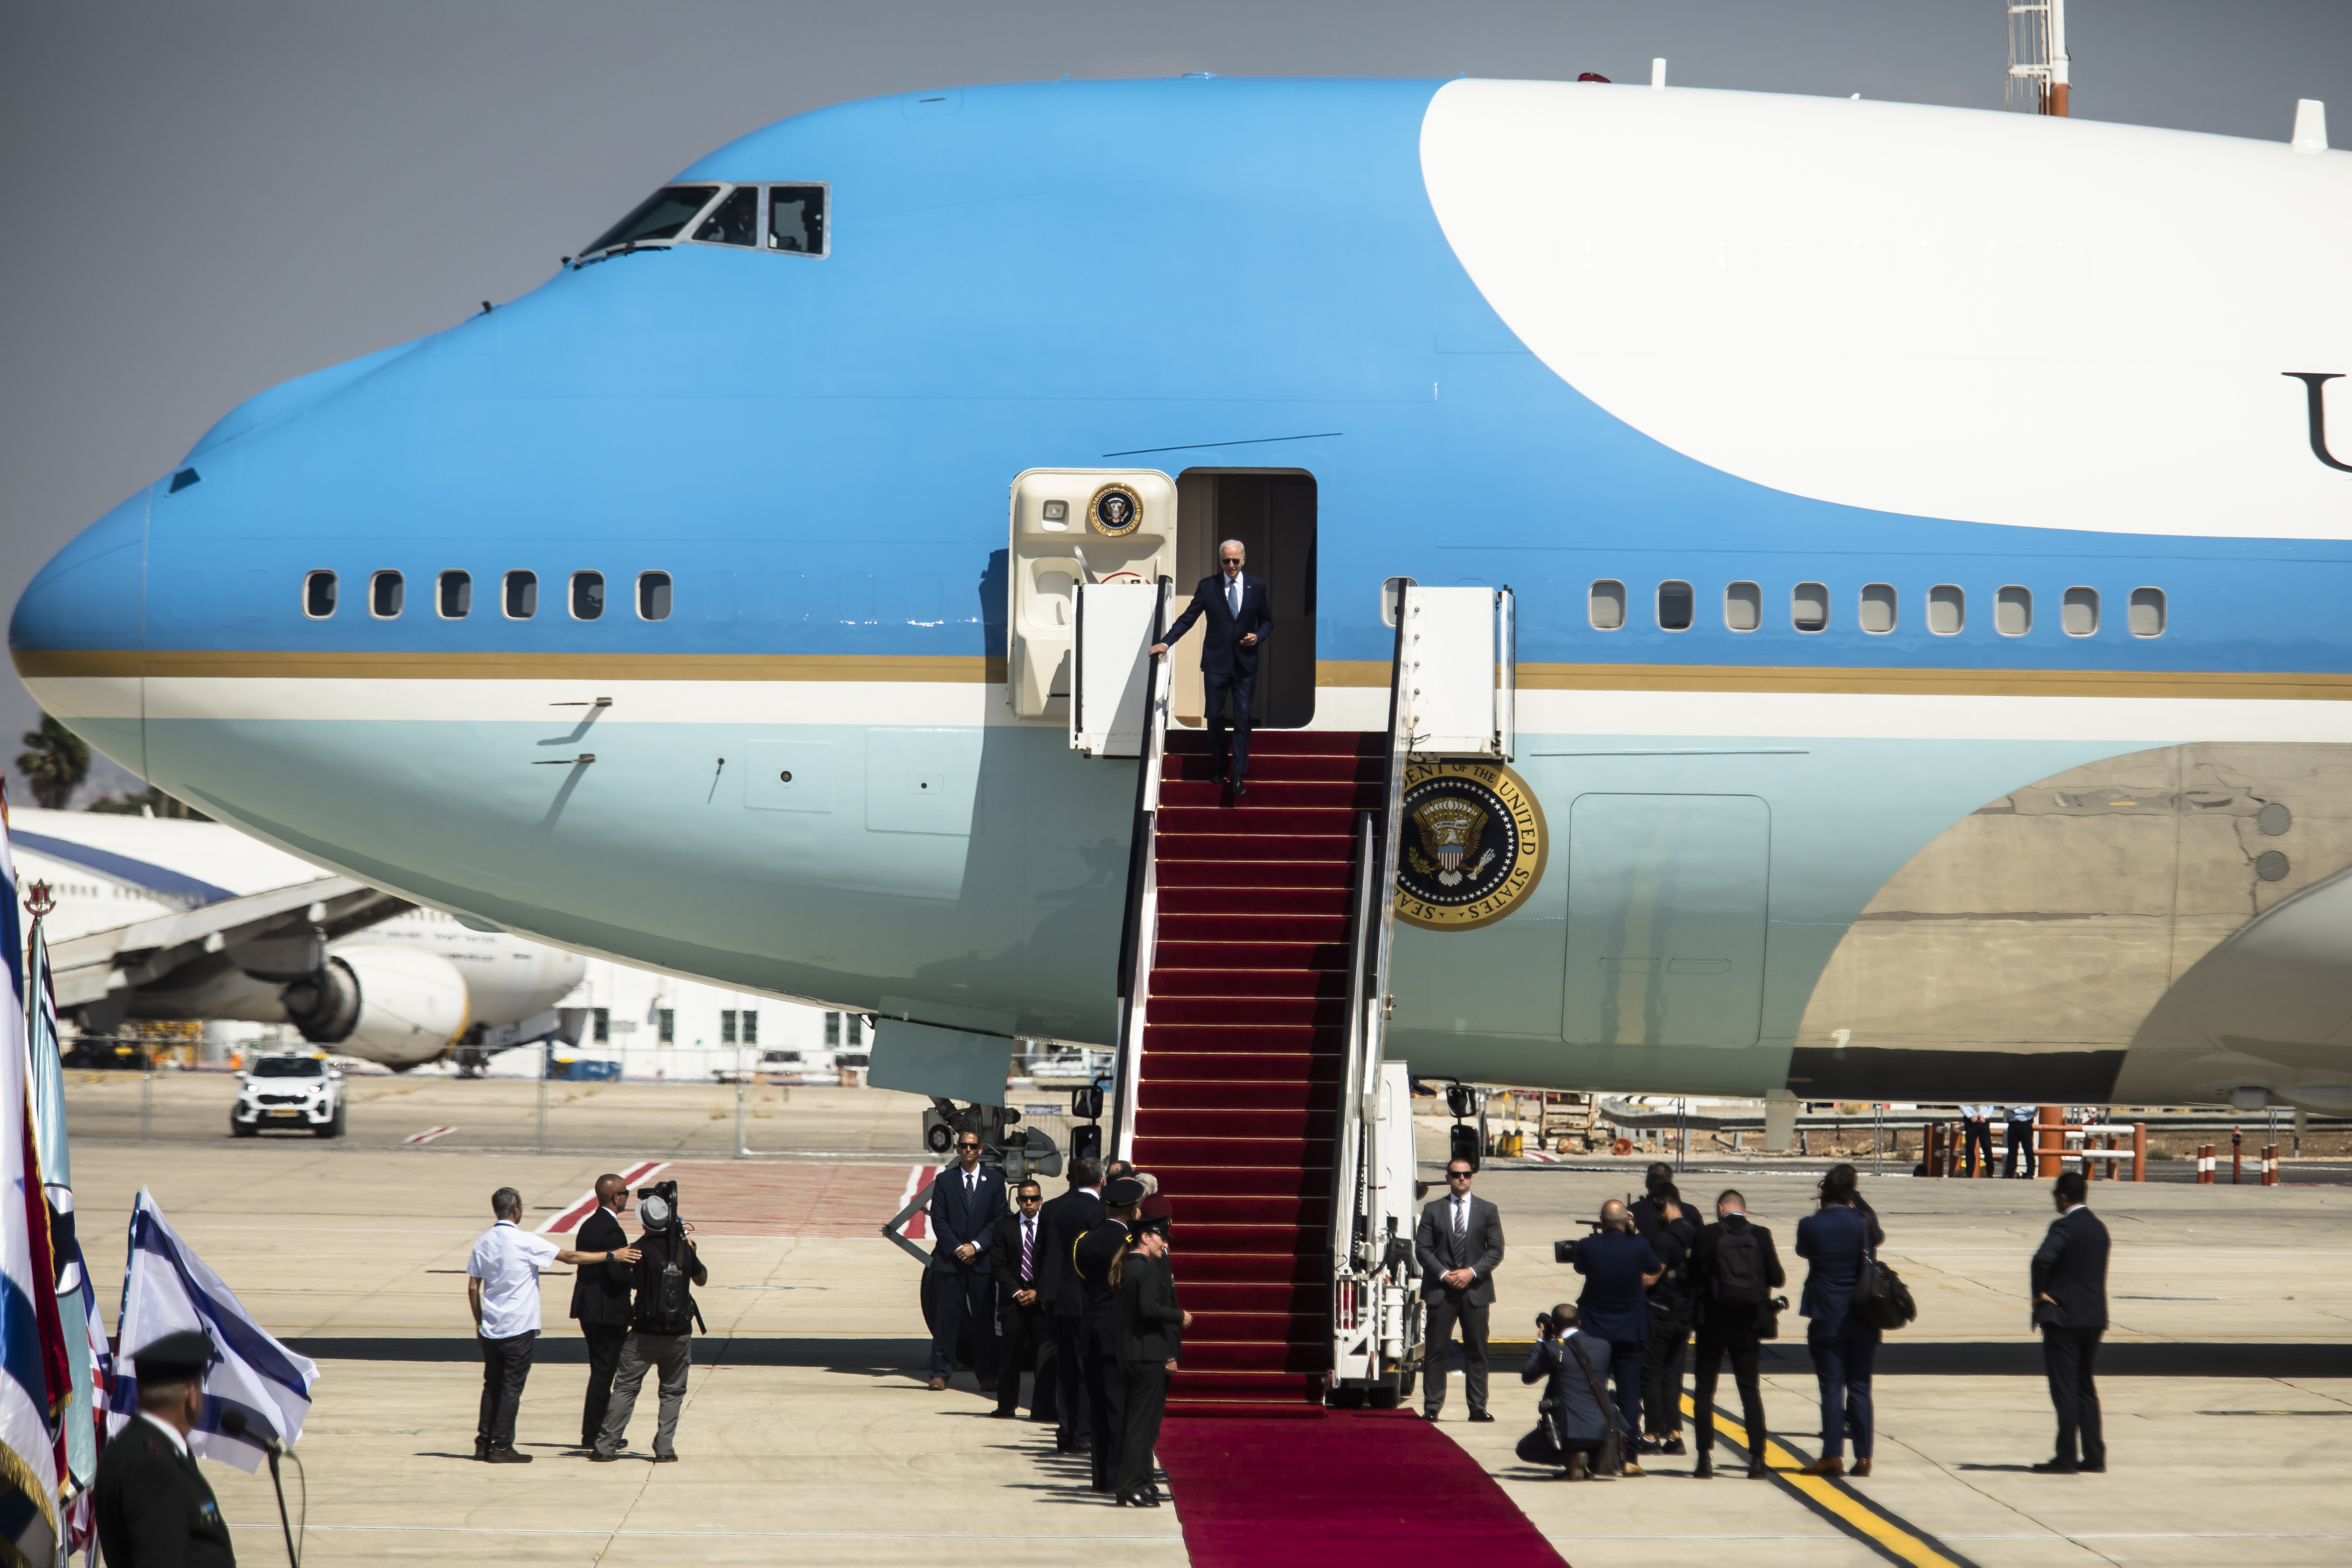 US President Joe Biden descends from Air Force One at Ben Gurion International Airport during Biden's visit to Israel on July 13, 2022 in Lod, Israel. Image: Amir Levy / Getty Images